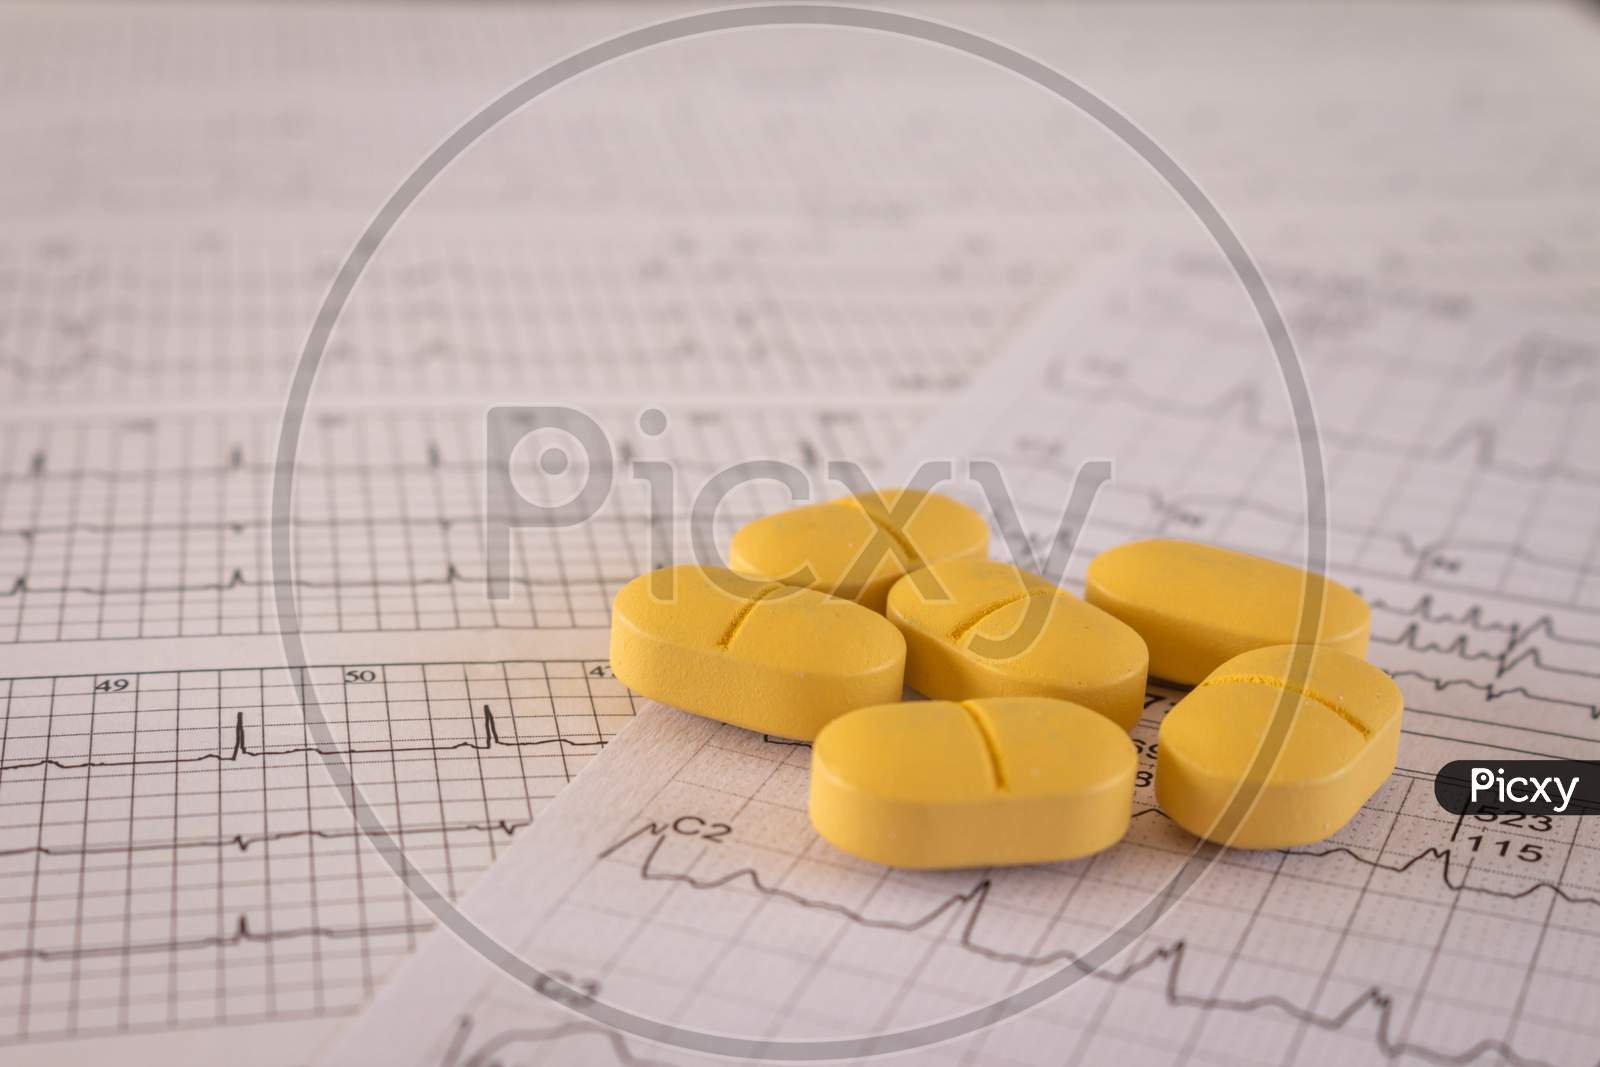 Huge Orange-Yellow Pills On Paper With Ekgs And Cardiac Arrhythmias. Medications For The Heart.